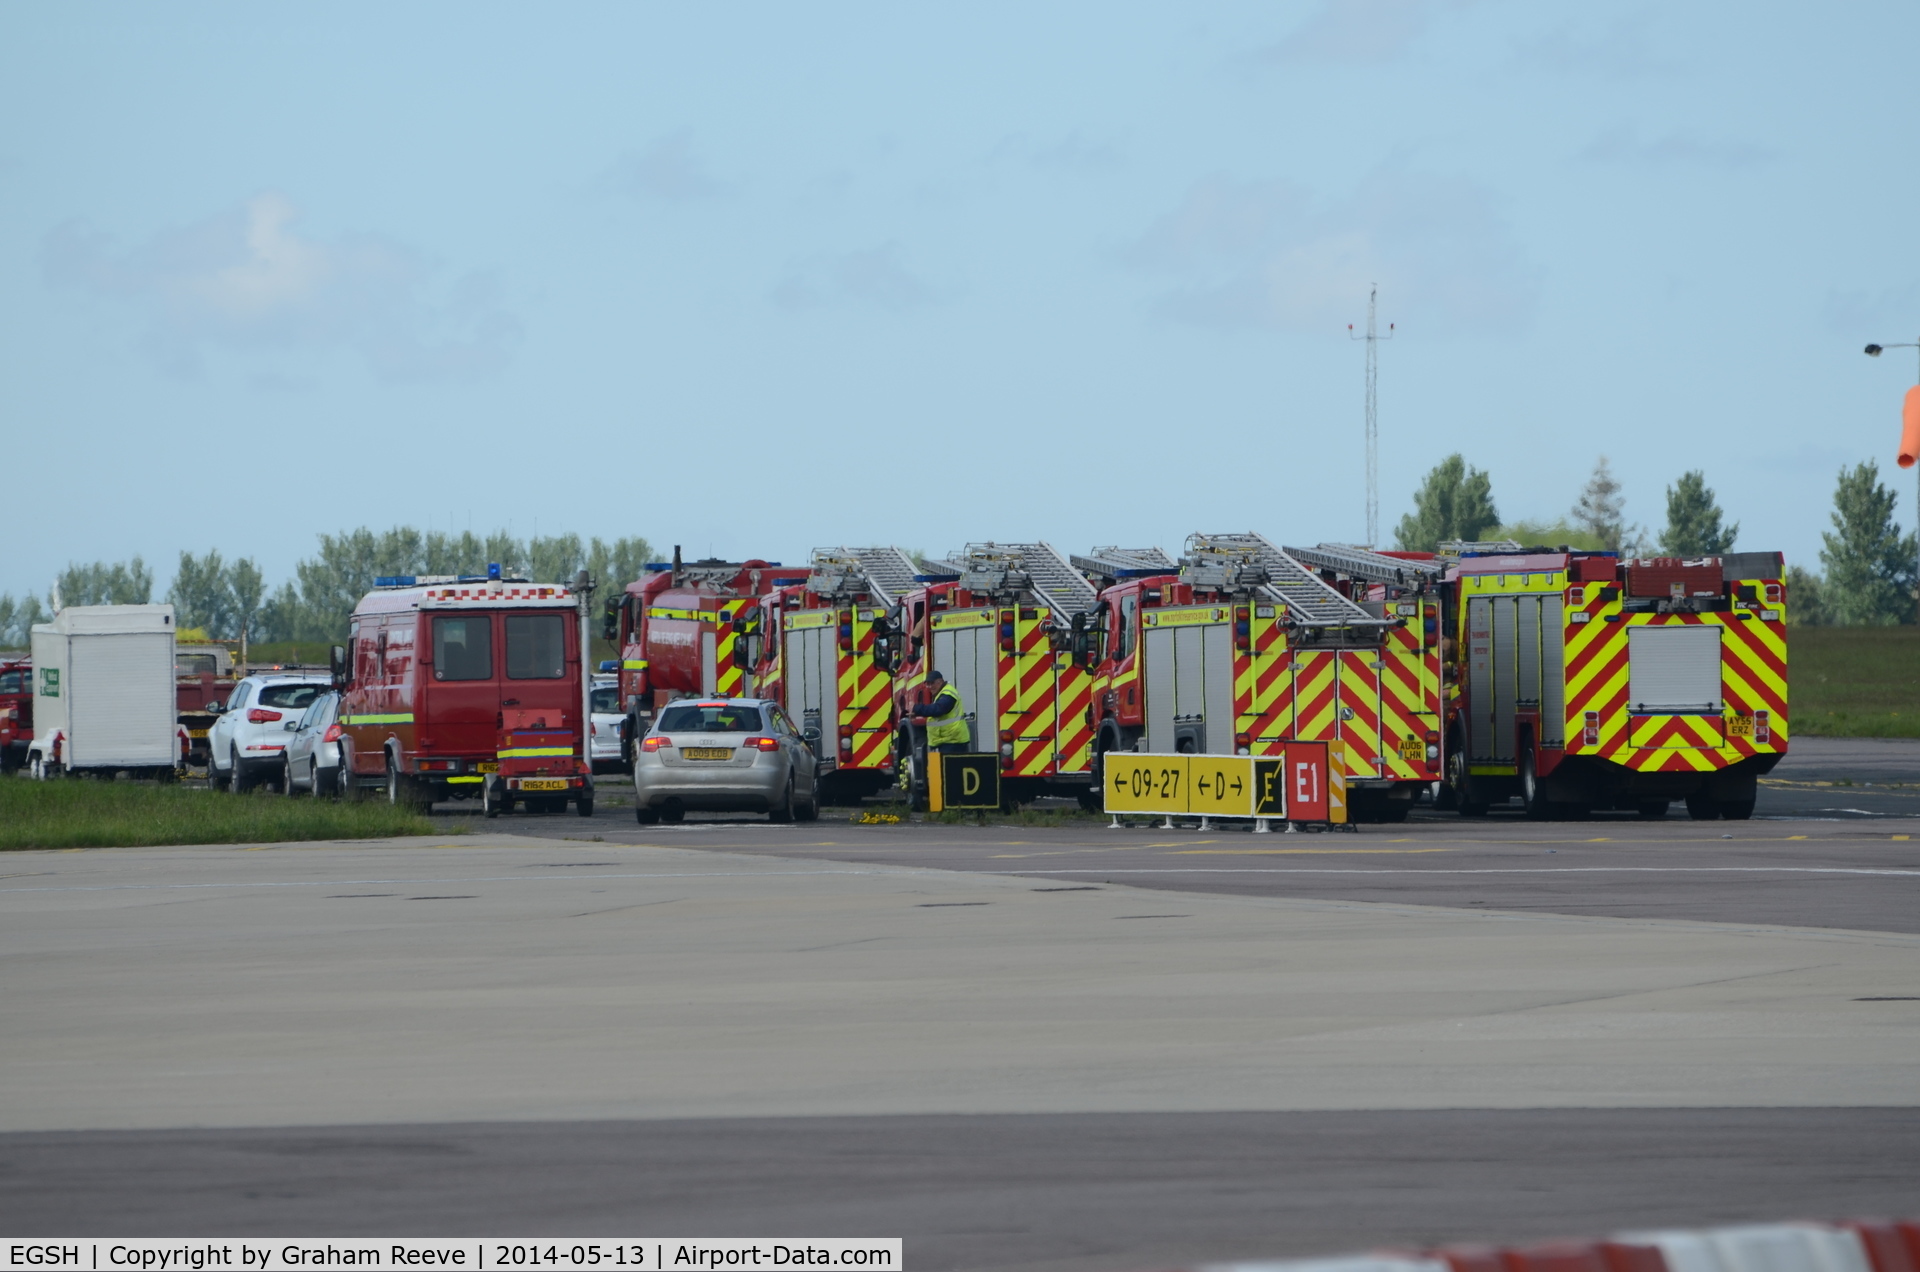 Norwich International Airport, Norwich, England United Kingdom (EGSH) - Fire engines lined up after a KLM 737 diverted to Norwich following a problem on a flight from Manchester to Amsterdam.